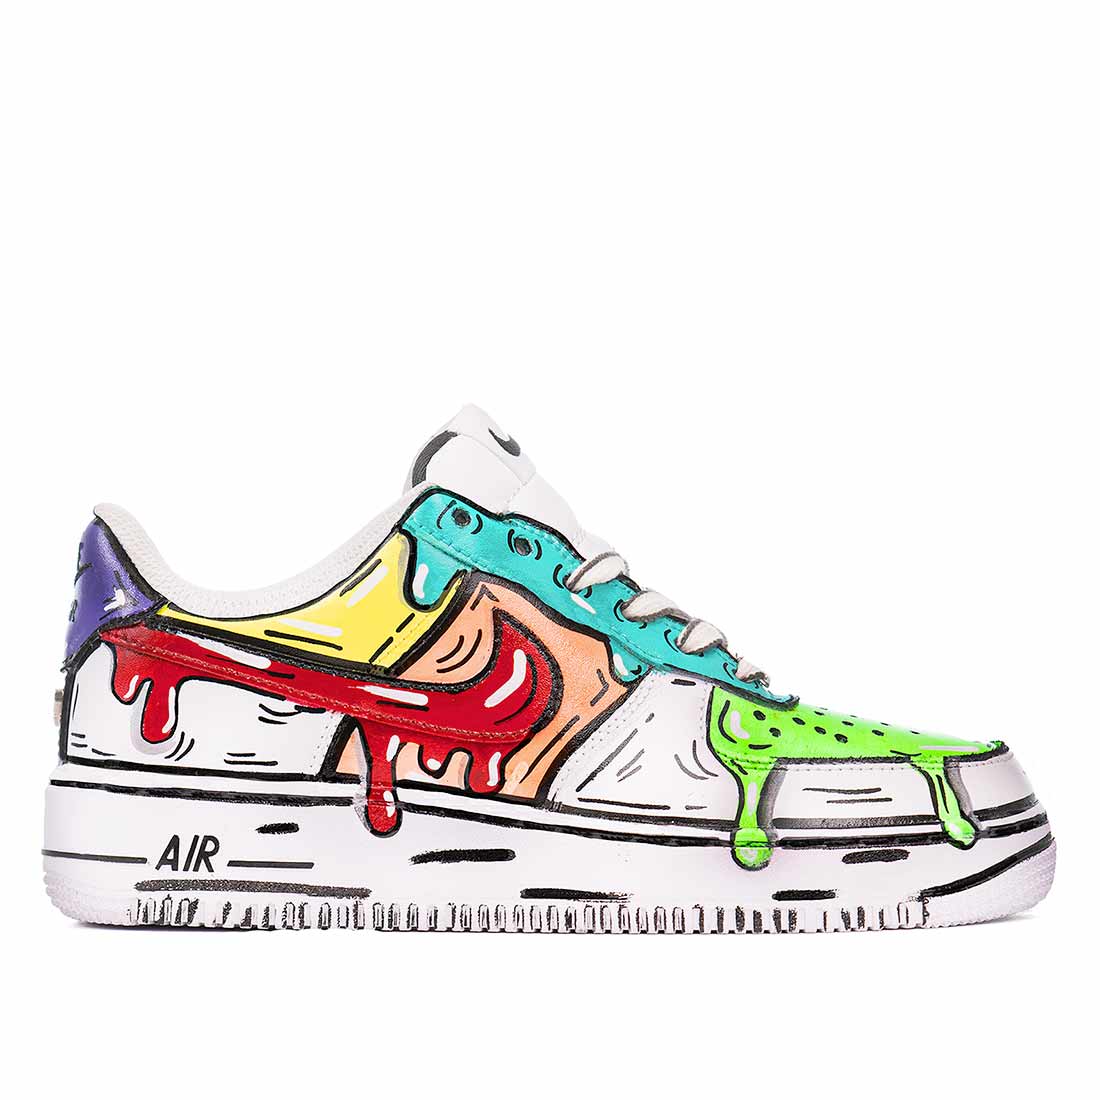 Nike Air Force One slime cartoon colorate disegnate a mano effetto 2D